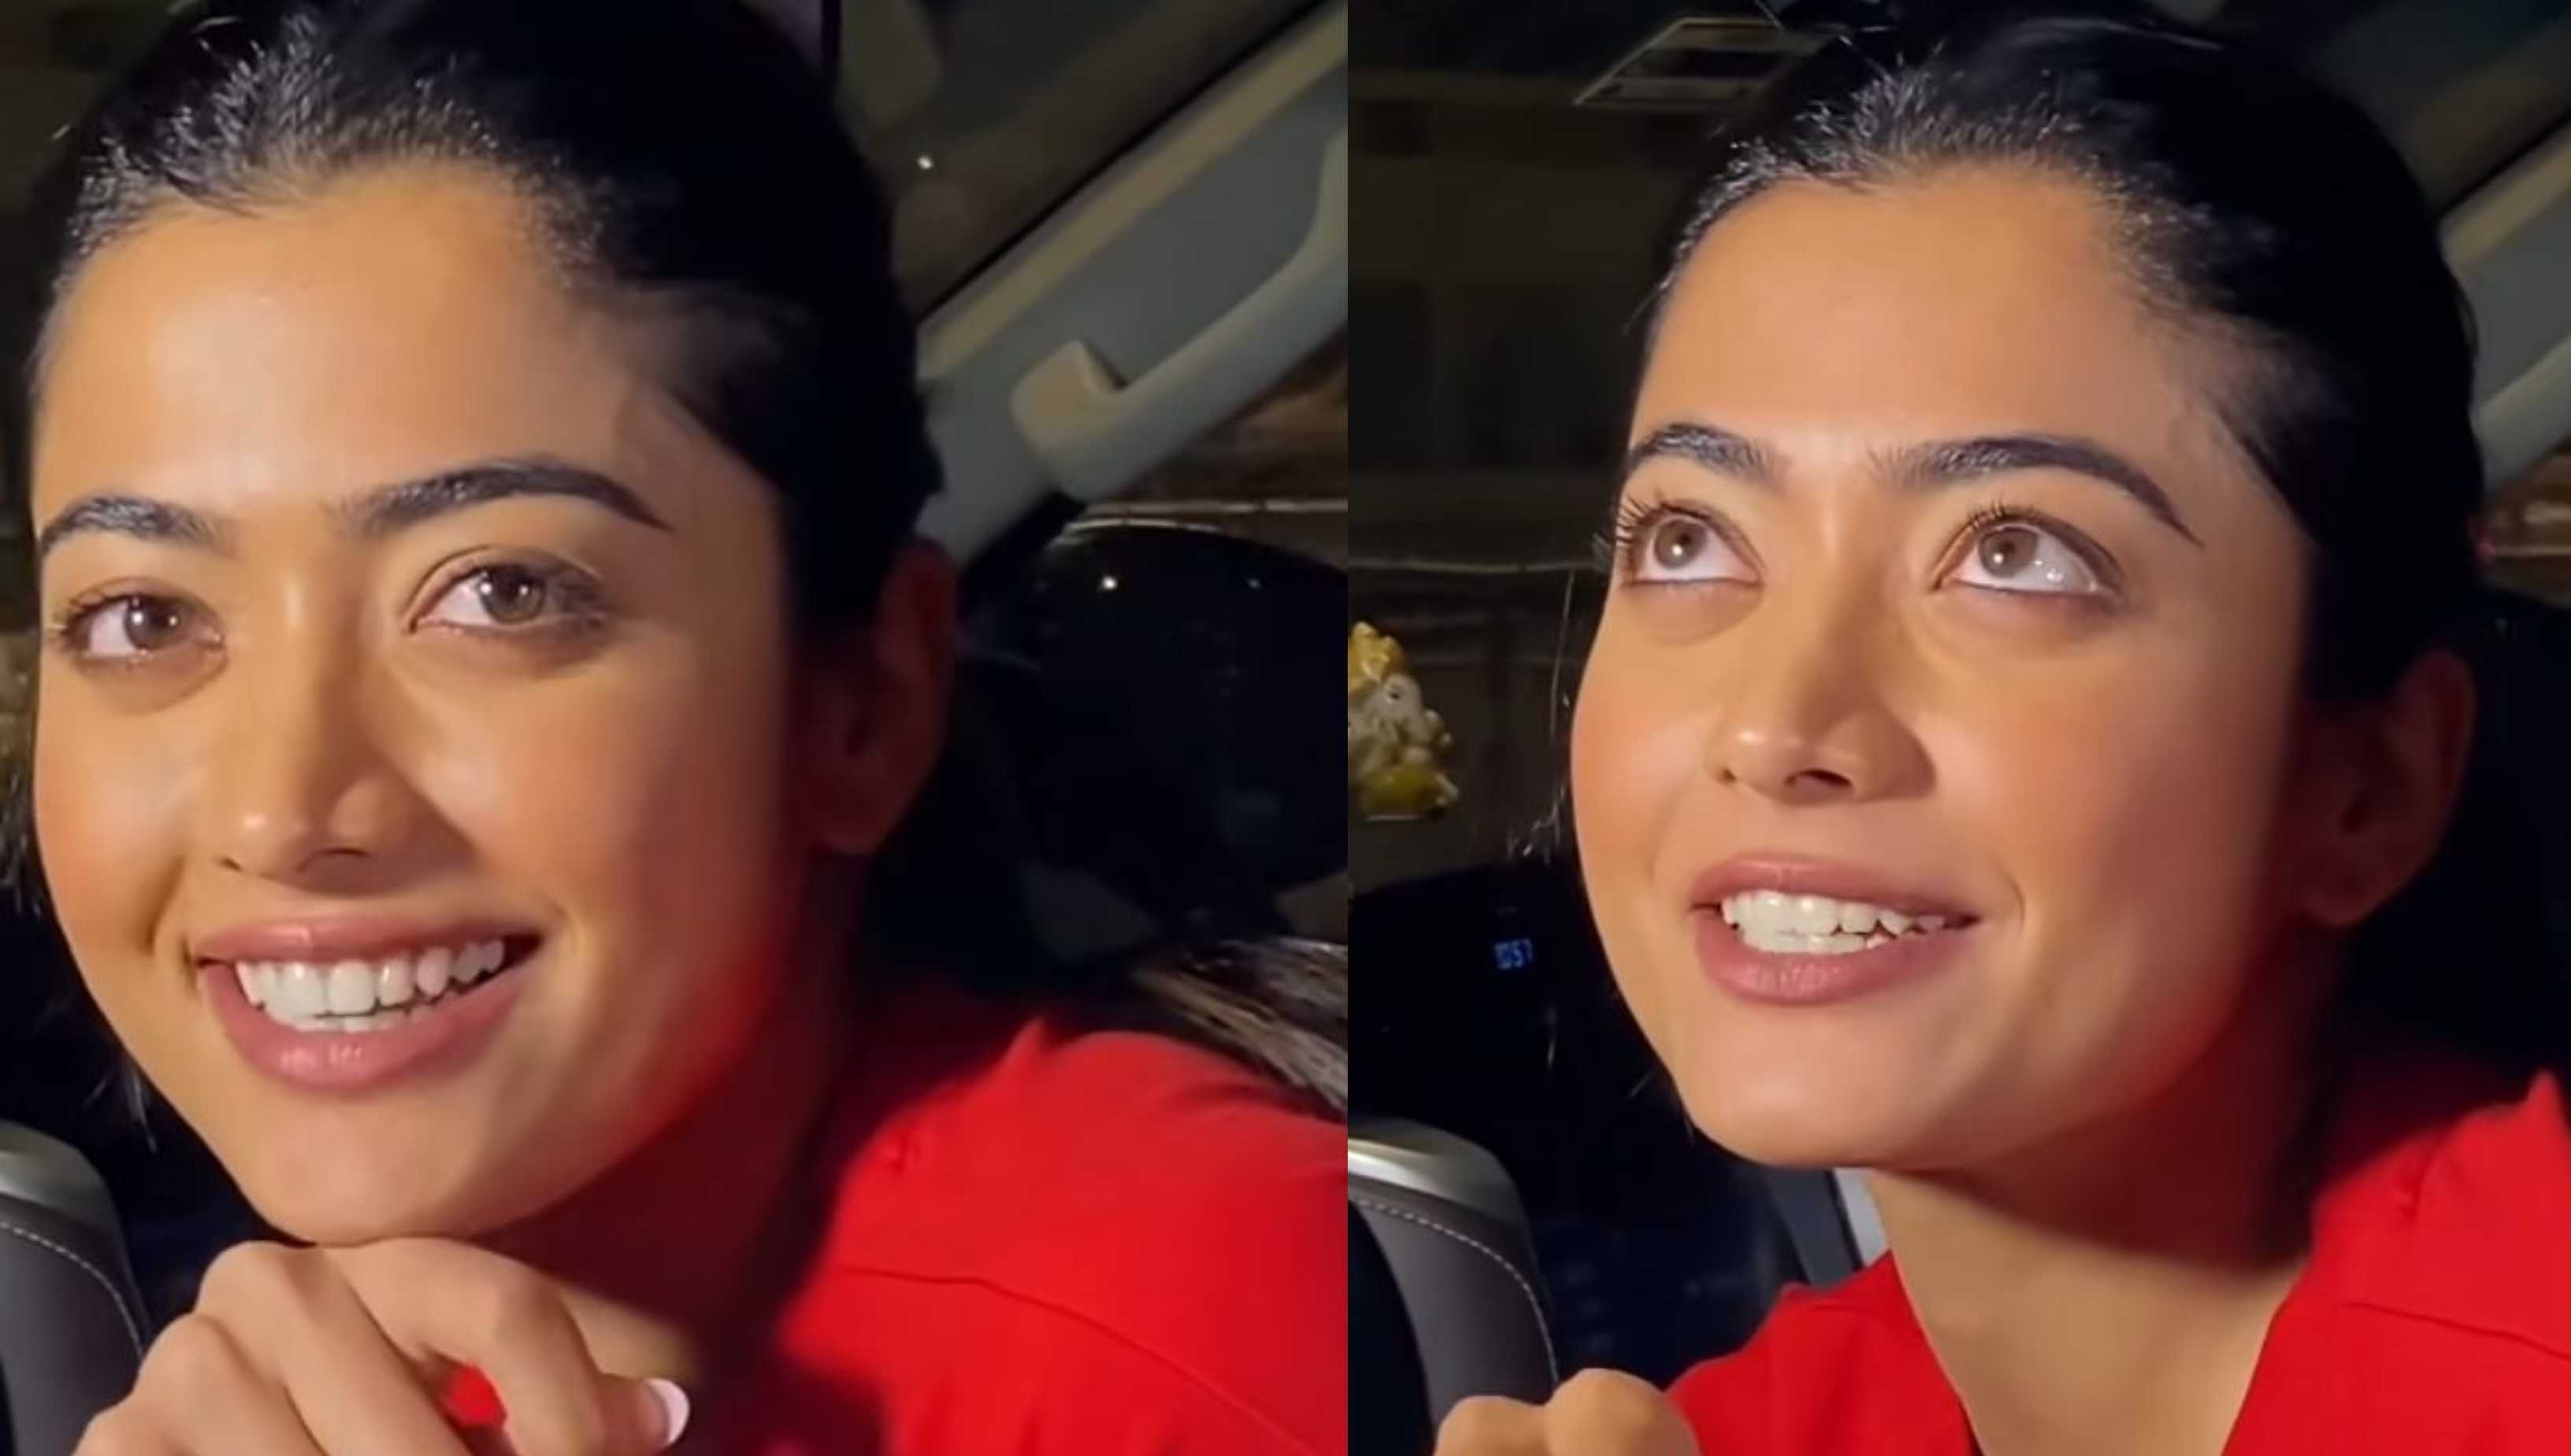 Rashmika Mandanna cutely apologizes to paparazzi for speaking in English; fans gush over how humble she is